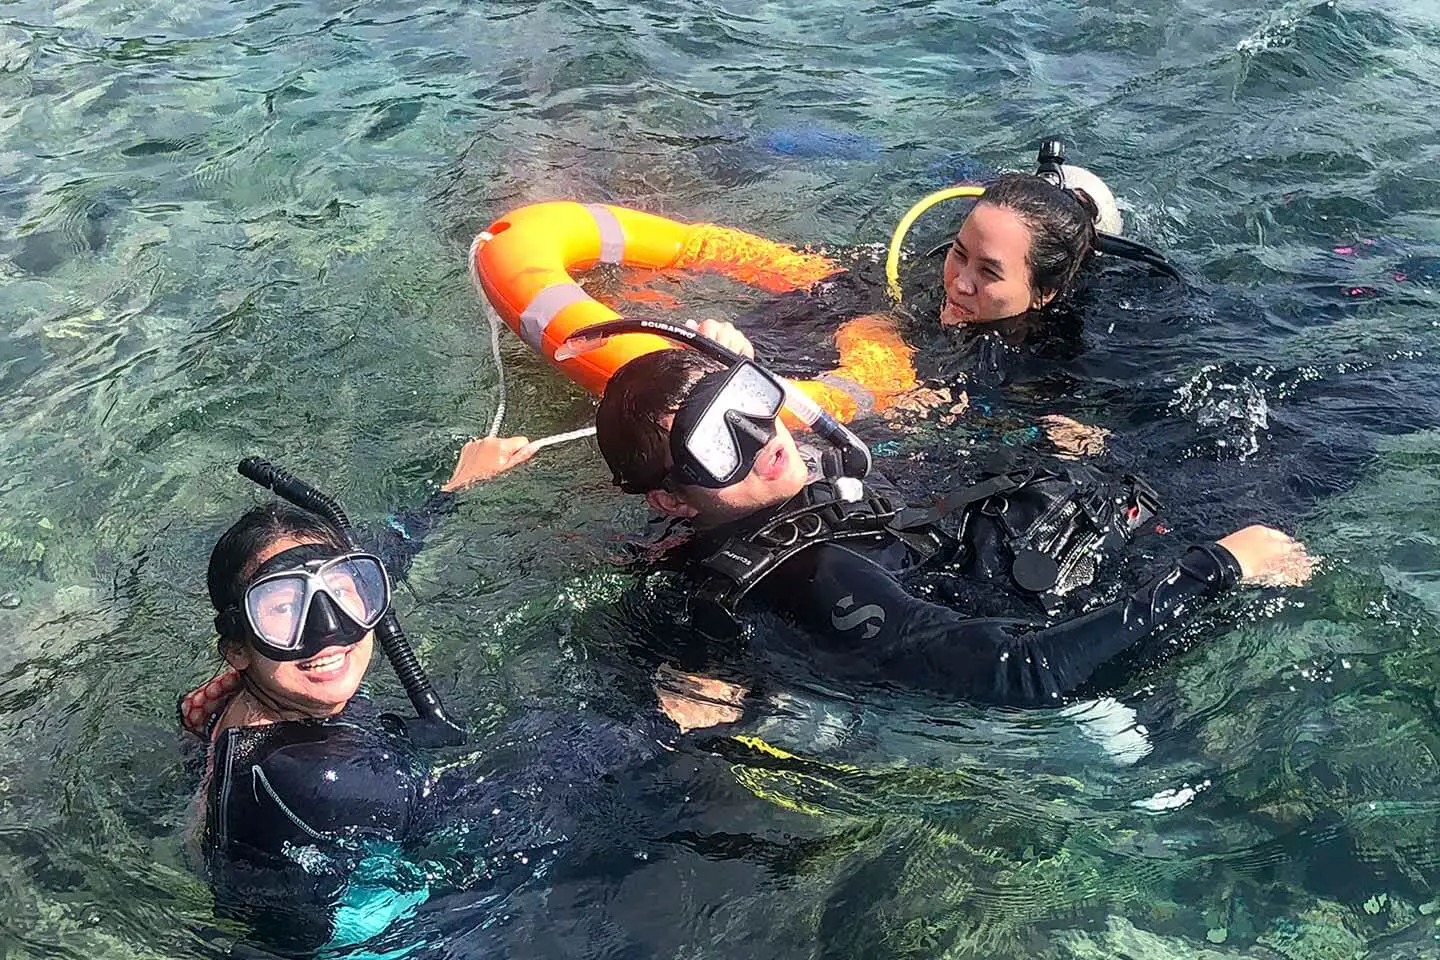 PADI Rescue Diving Course Open Water Drills